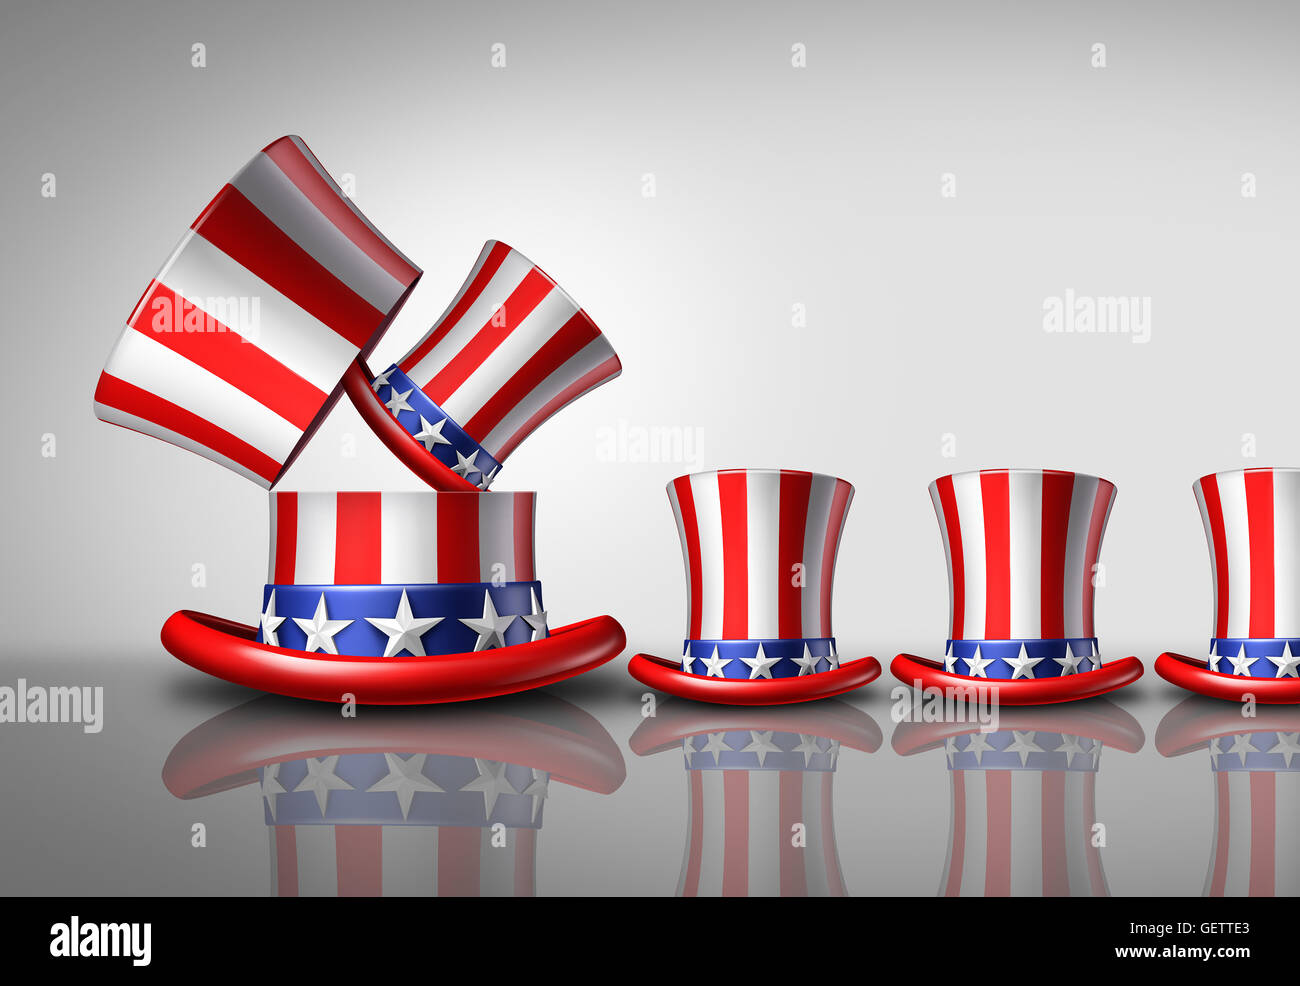 American population increase demographic concept as an open large United States top hat giving birth to smaller hats as a national fertility growth symbol or increasing voters as a 3D illustration. Stock Photo